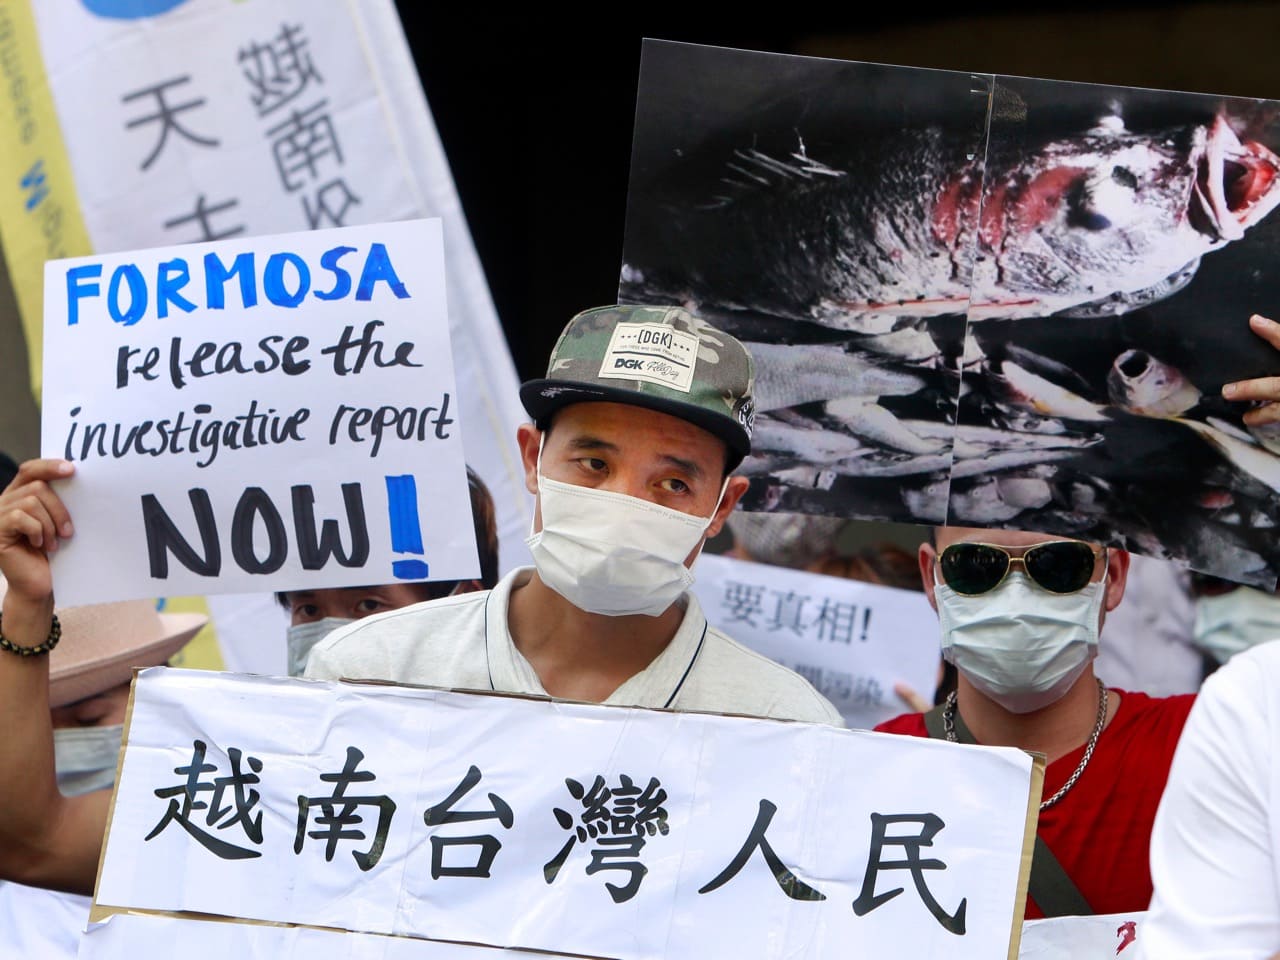 Vietnamese activists call on Formosa Plastics Group to take responsibilities for the cleanup in Vietnam, during a 10 August 2016 protest, in Taipei, Taiwan, AP Photo/Chiang Ying-ying